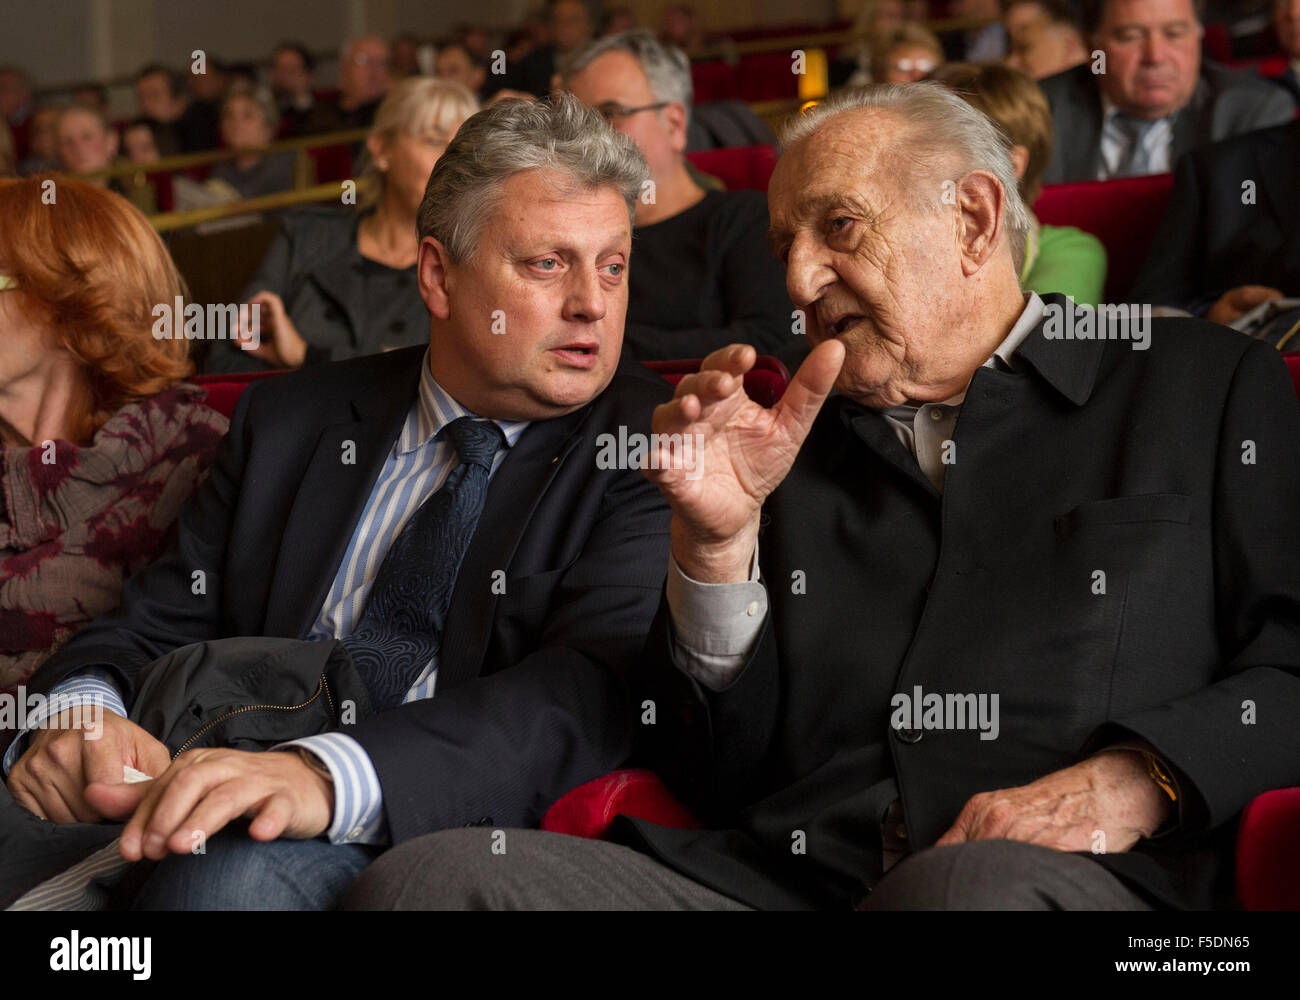 Zagreb, Croatia. 2nd Nov, 2015. Croatian movie director Veljko Bulajic (R) attends the promotion of a monograph covering his life and work, in Zagreb, capital of Croatia, Nov. 2, 2015. The 87-years-old director Veljko Bulajic is famous for directing World War II themed movies. In 1969 he wrote and directed the legendary war film Battle of Neretva. Credit:  Miso Lisanin/Xinhua/Alamy Live News Stock Photo